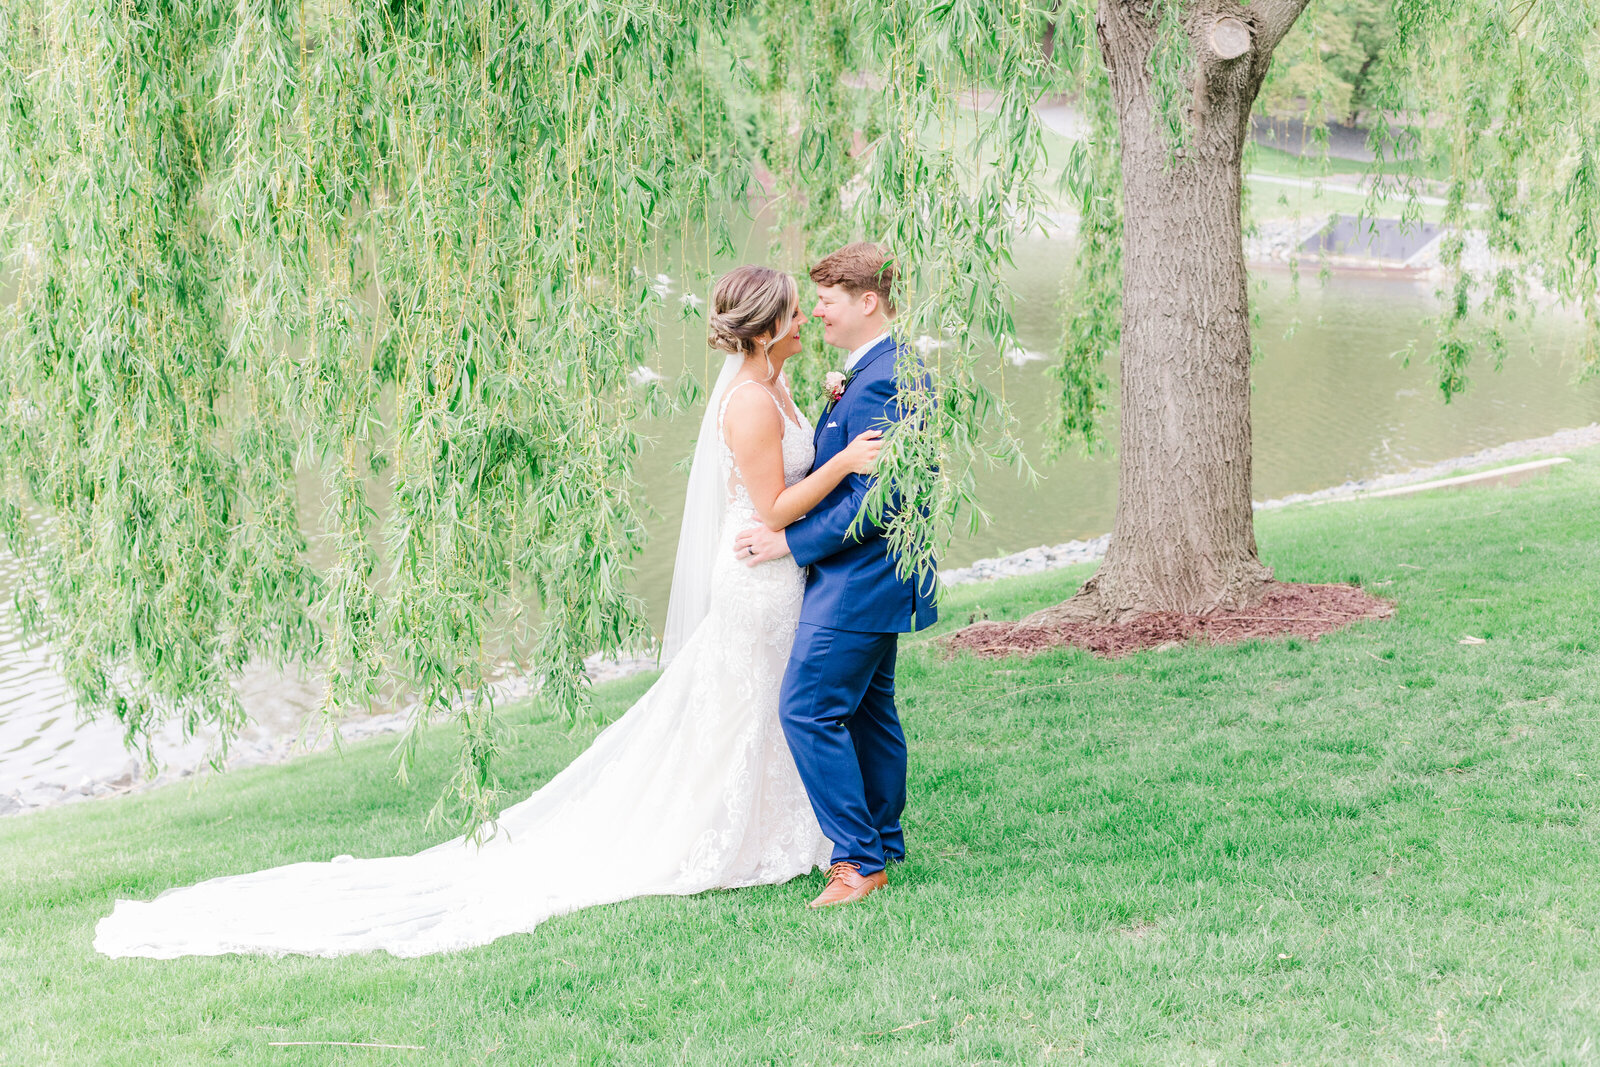 Bride and groom embrace under weeping willow